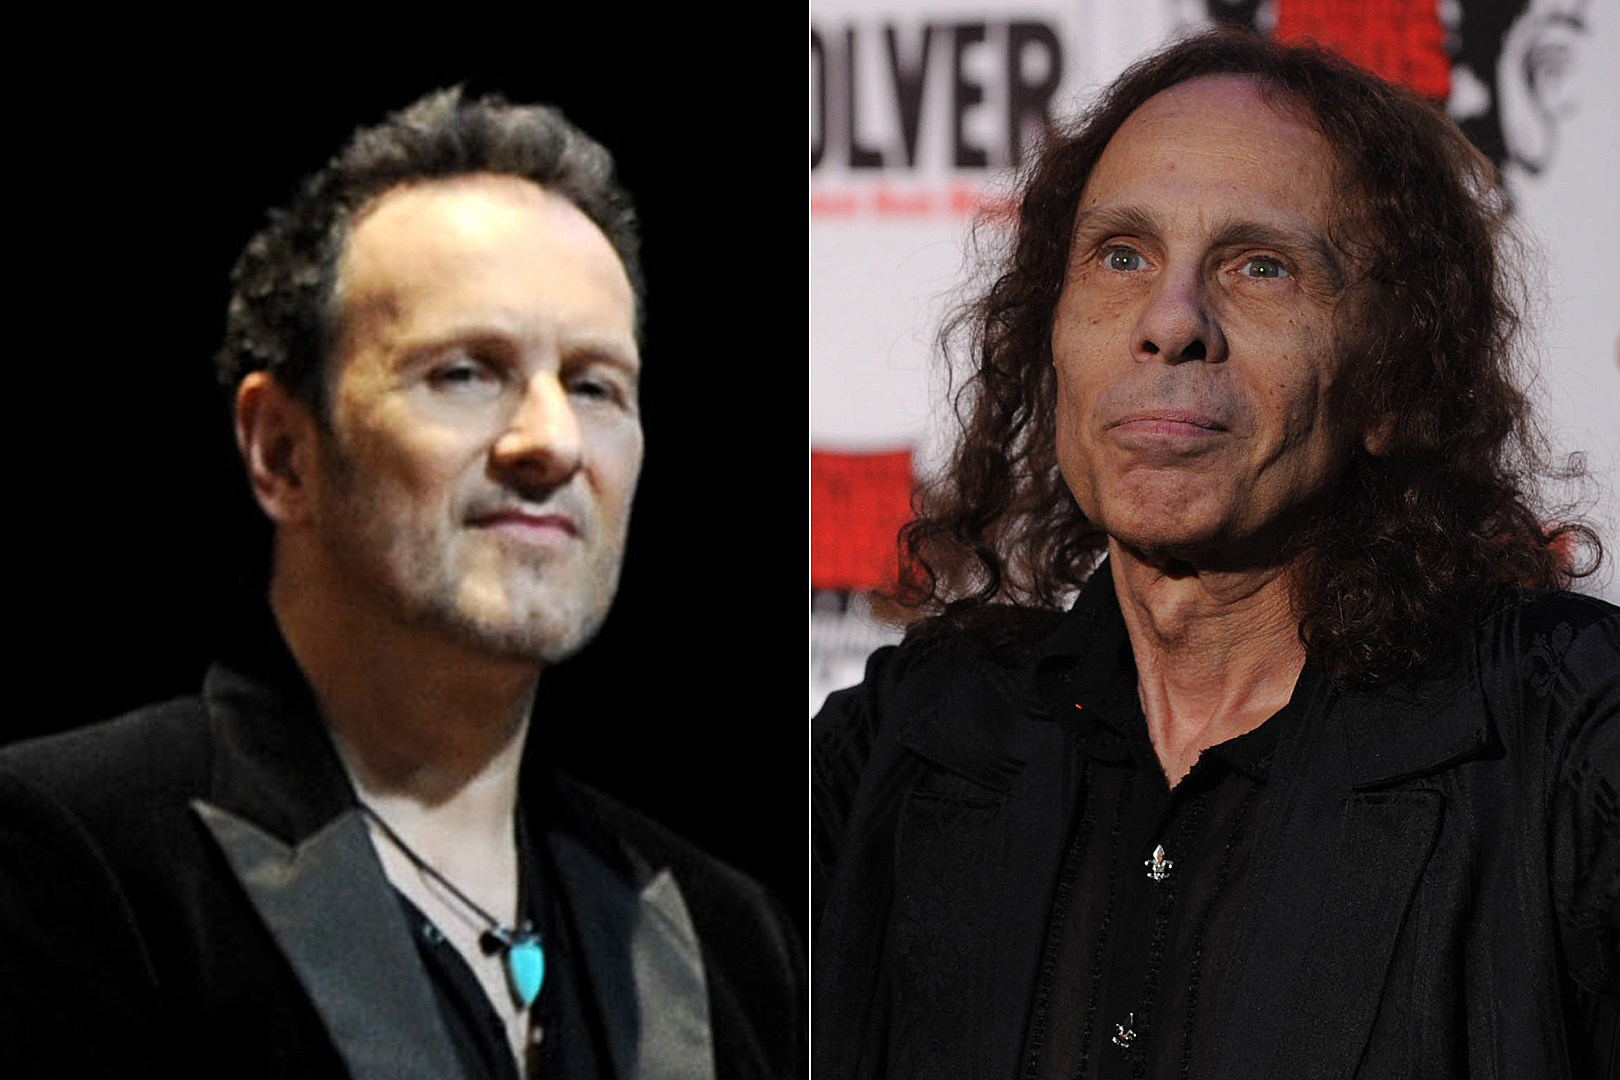 Vivian Campbell Explains Why He Doesn't Have Many Happy Memories From Making of DIO's ...